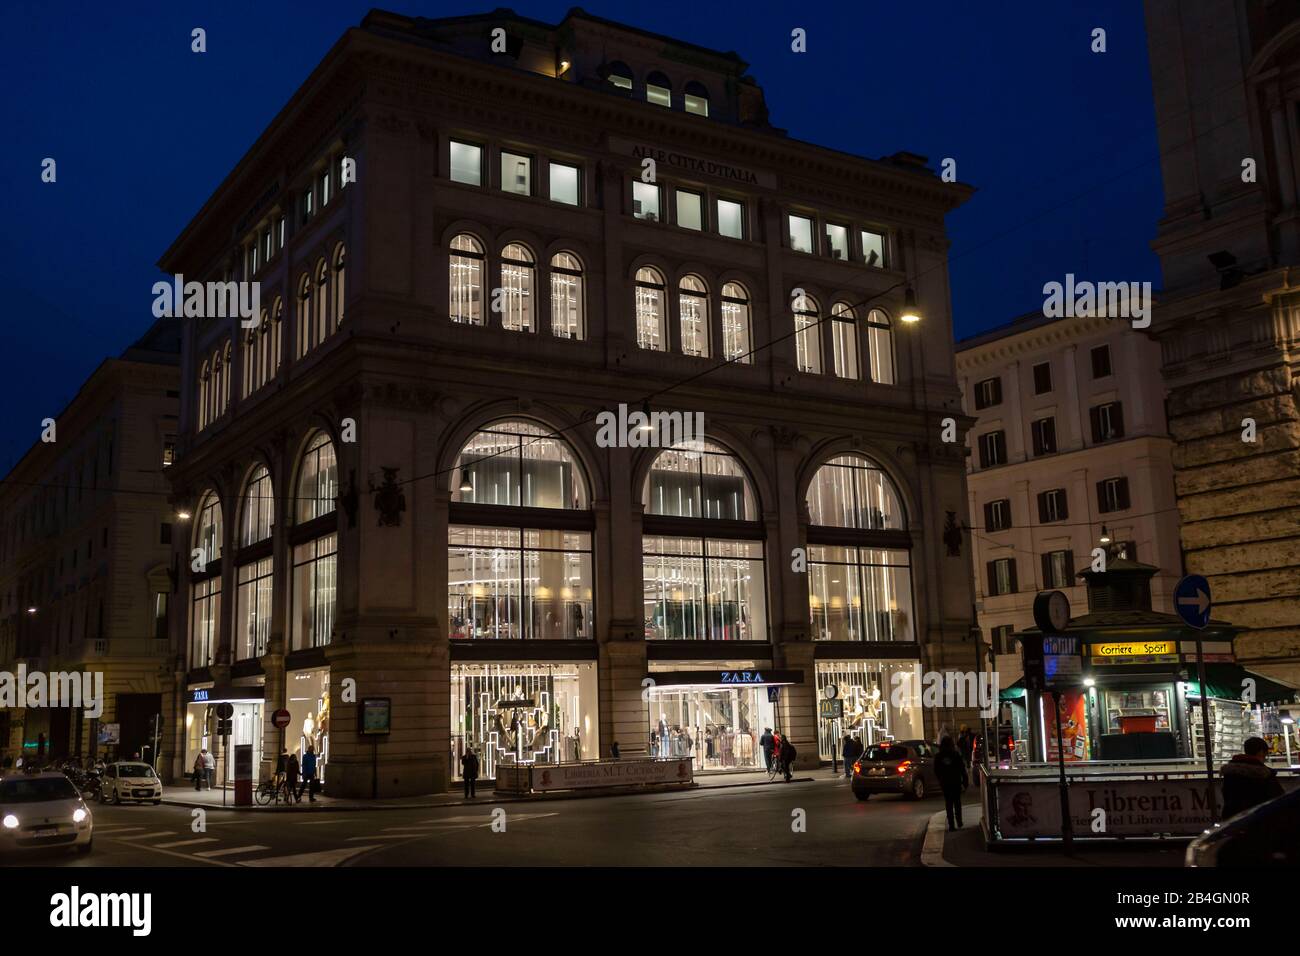 Zara retail store building in central Rome at night Stock Photo - Alamy